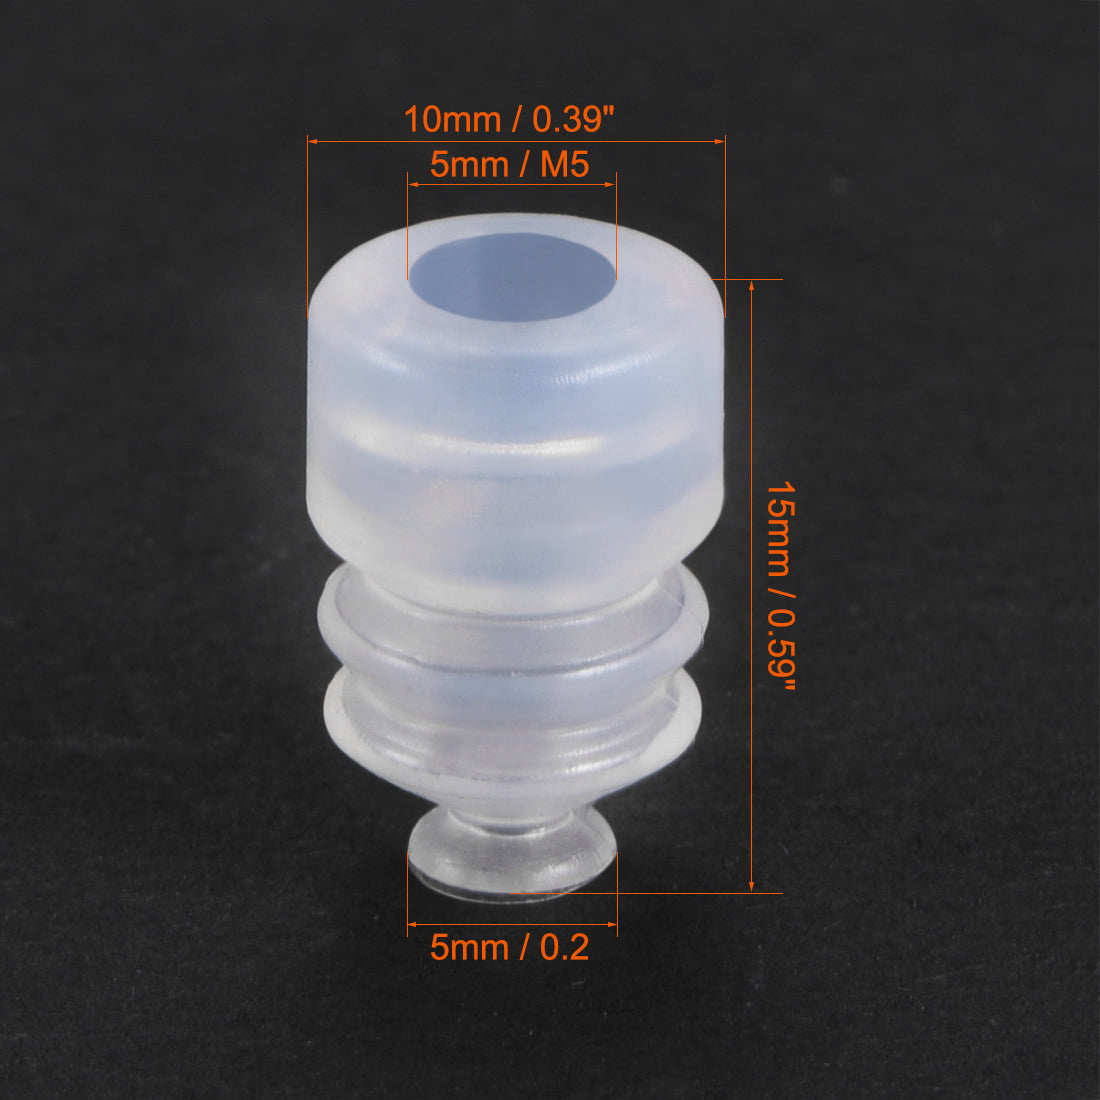 uxcell Uxcell Clear White Soft Silicone Waterproof Vacuum Suction Cup 5mmx5mm Bellows Suction Cup,4pcs